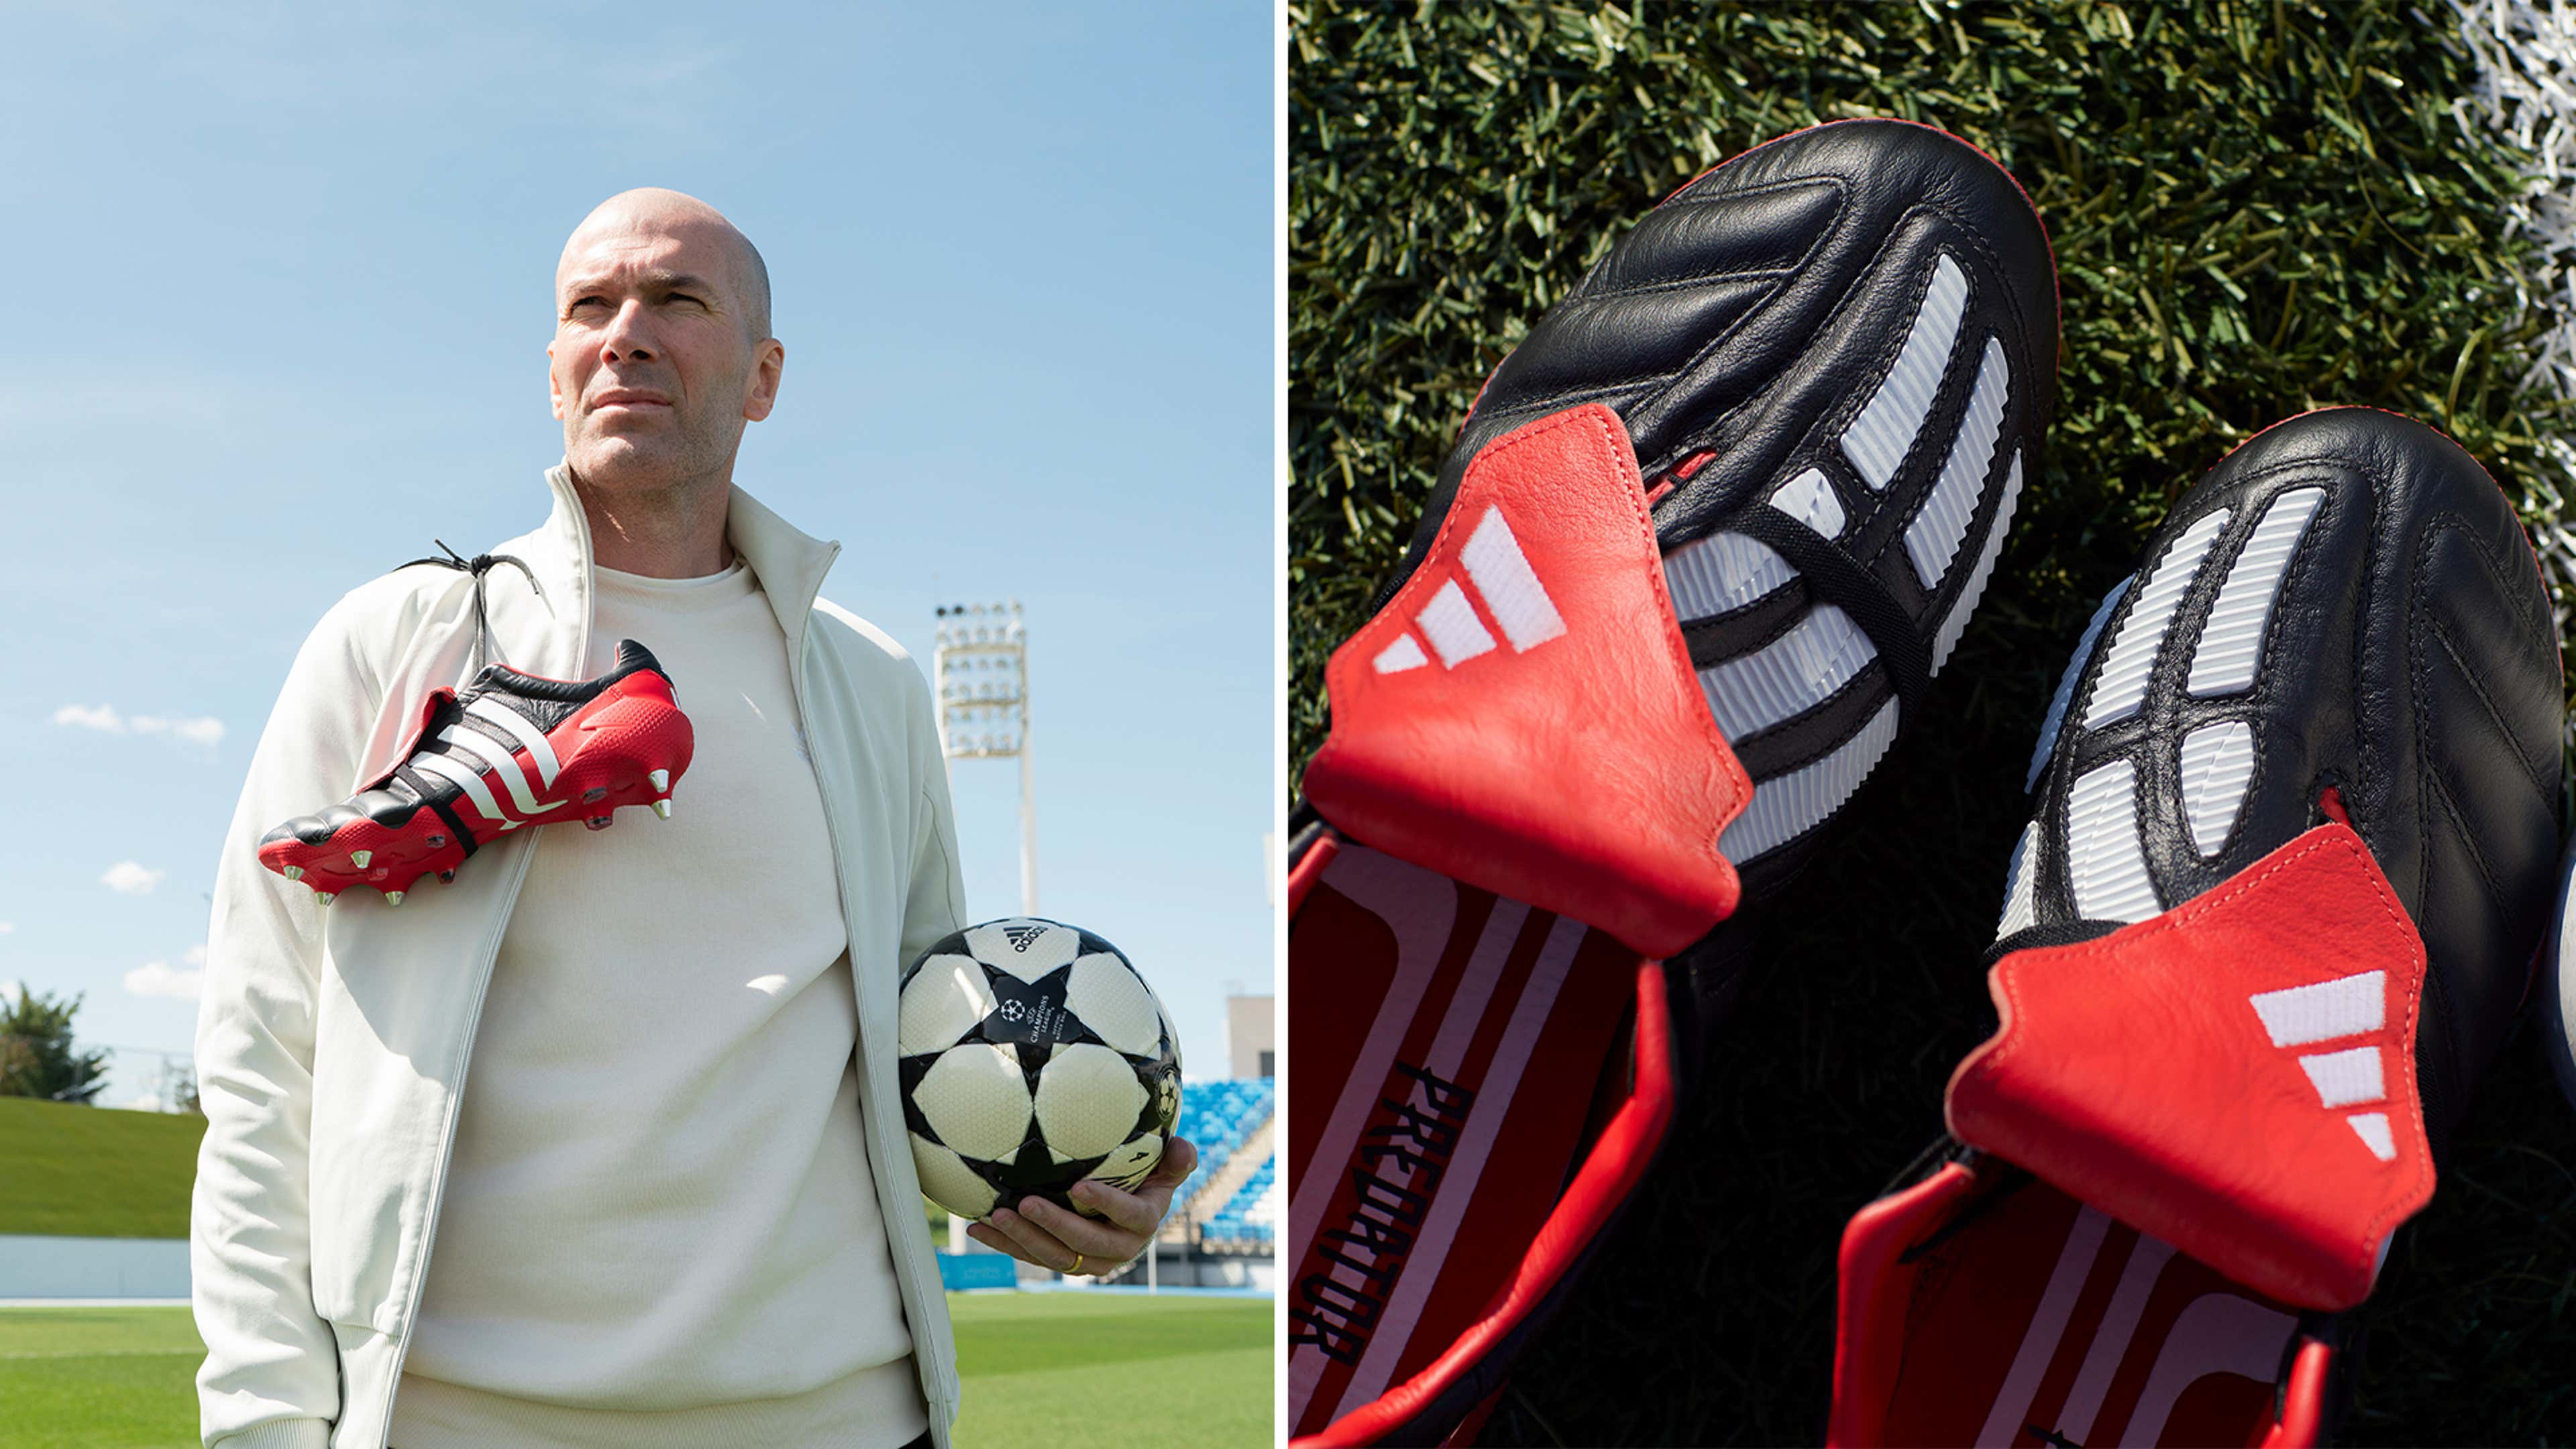 adidas 2002 Predator Mania: Boots made famous by Zidane back US